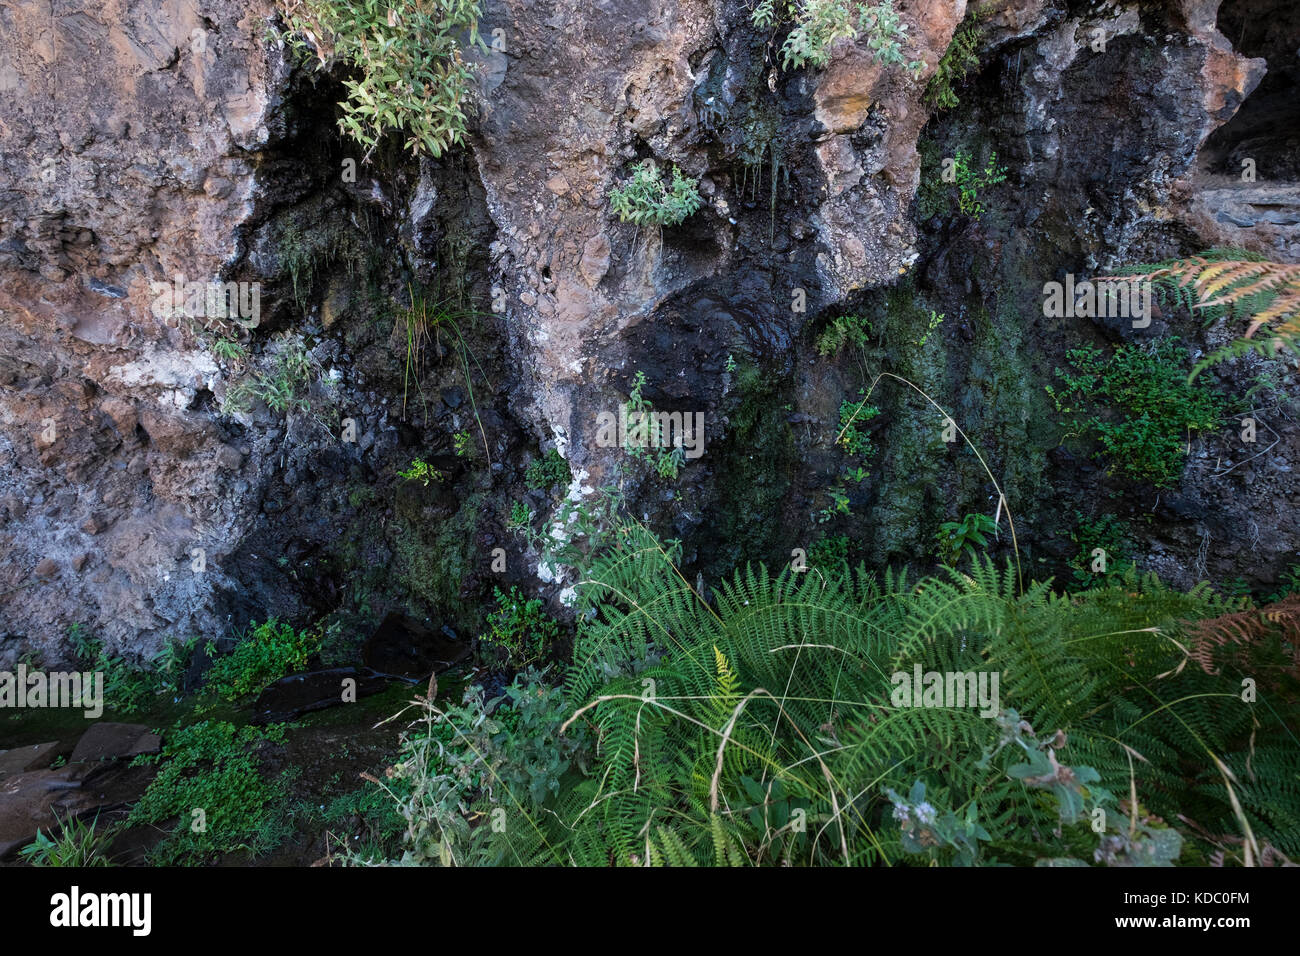 Water seeping from the rocks in the Barranco de los Fuentes, spring water, Adeje, Tenerife, canary Islands, Spain Stock Photo